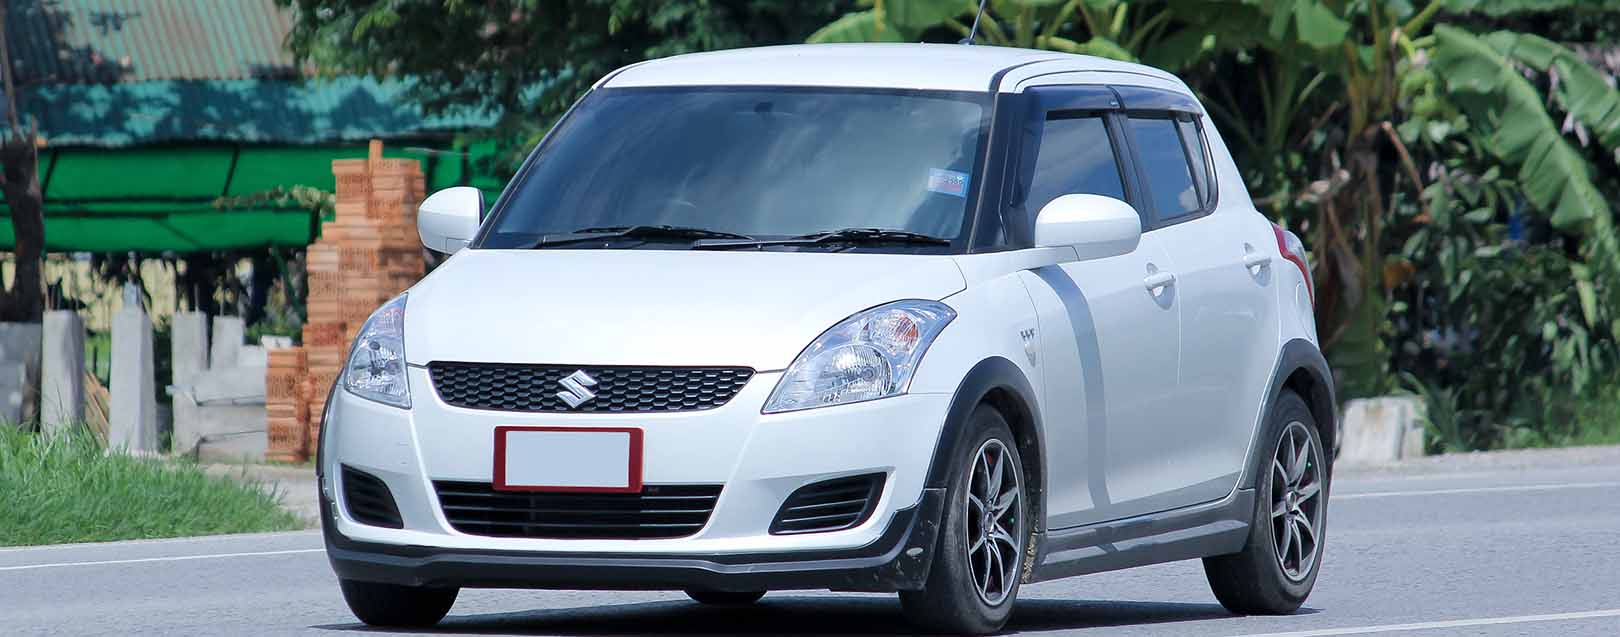  Indian Swift races past 50 lakh sales globally